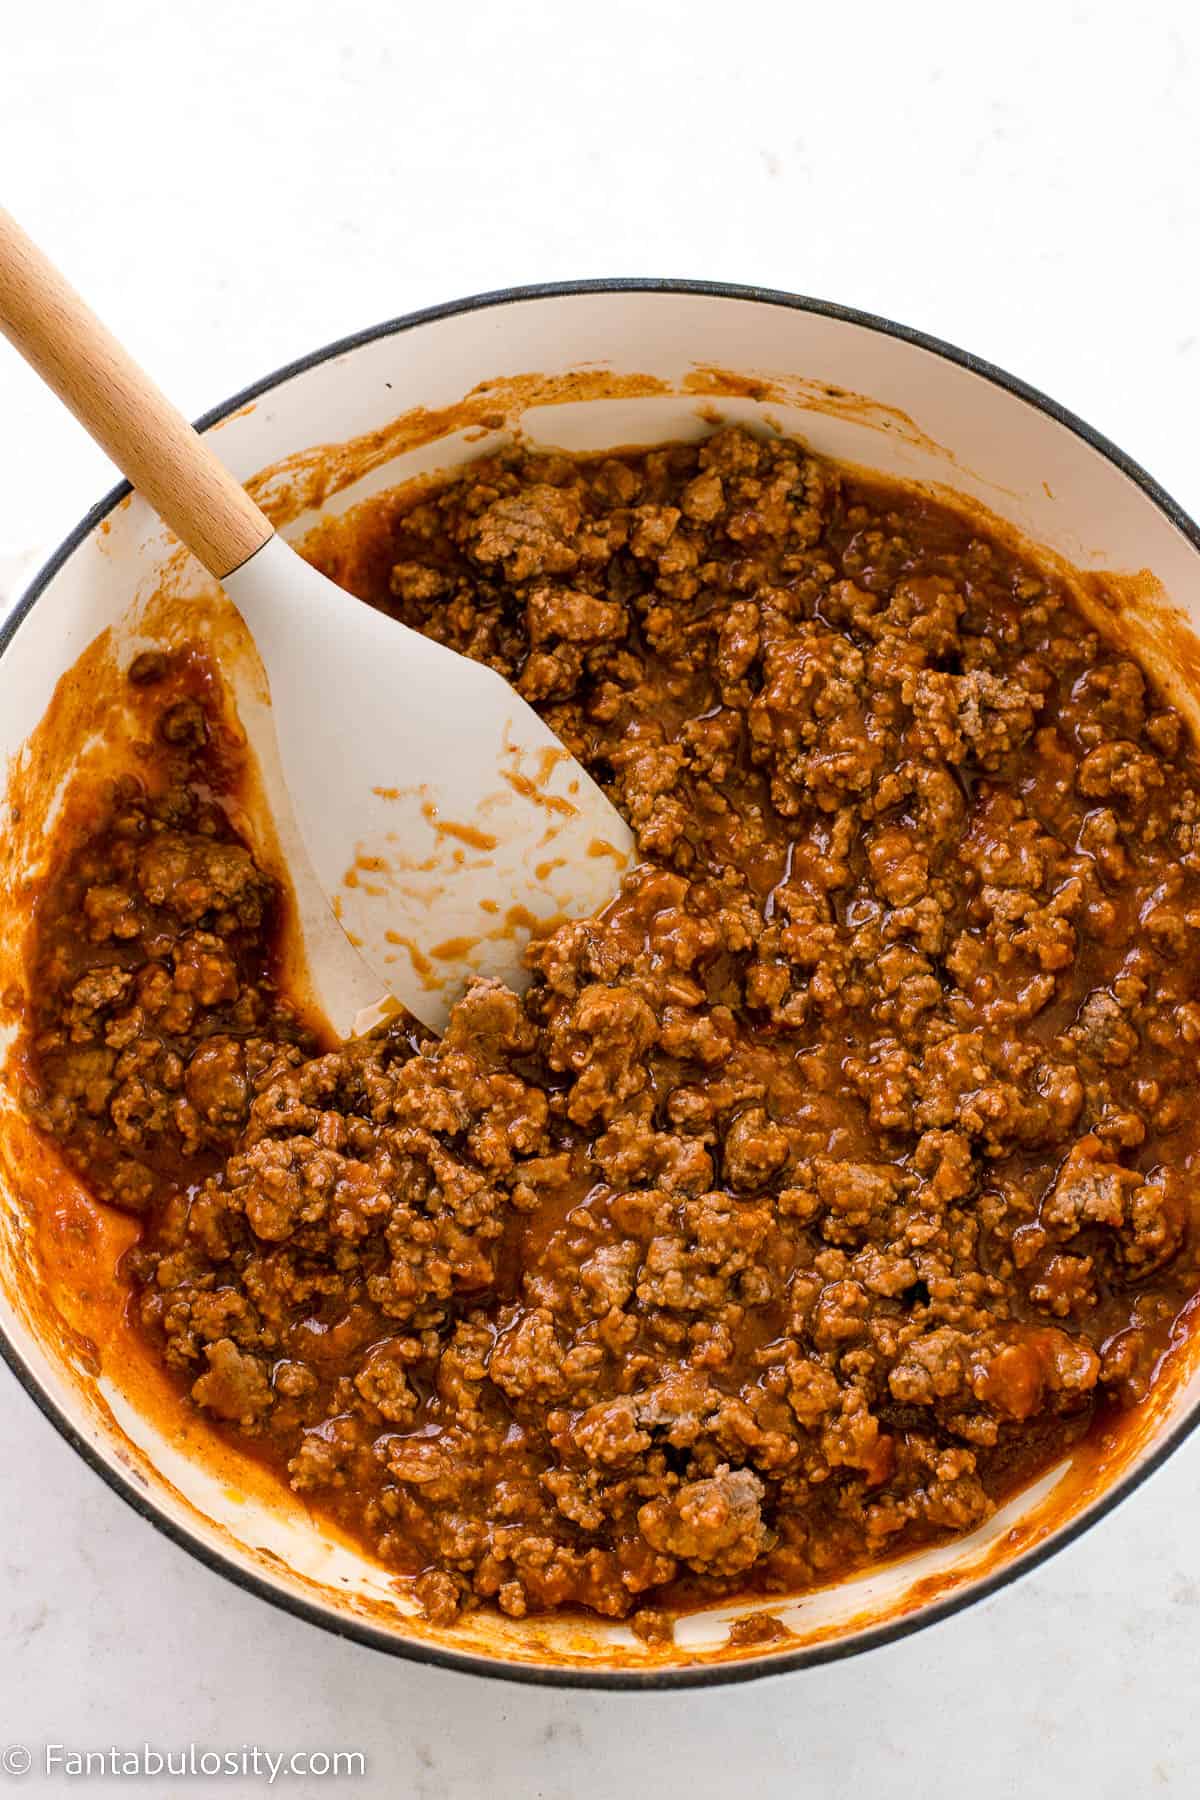 Sloppy joe sauce mixed in with beef